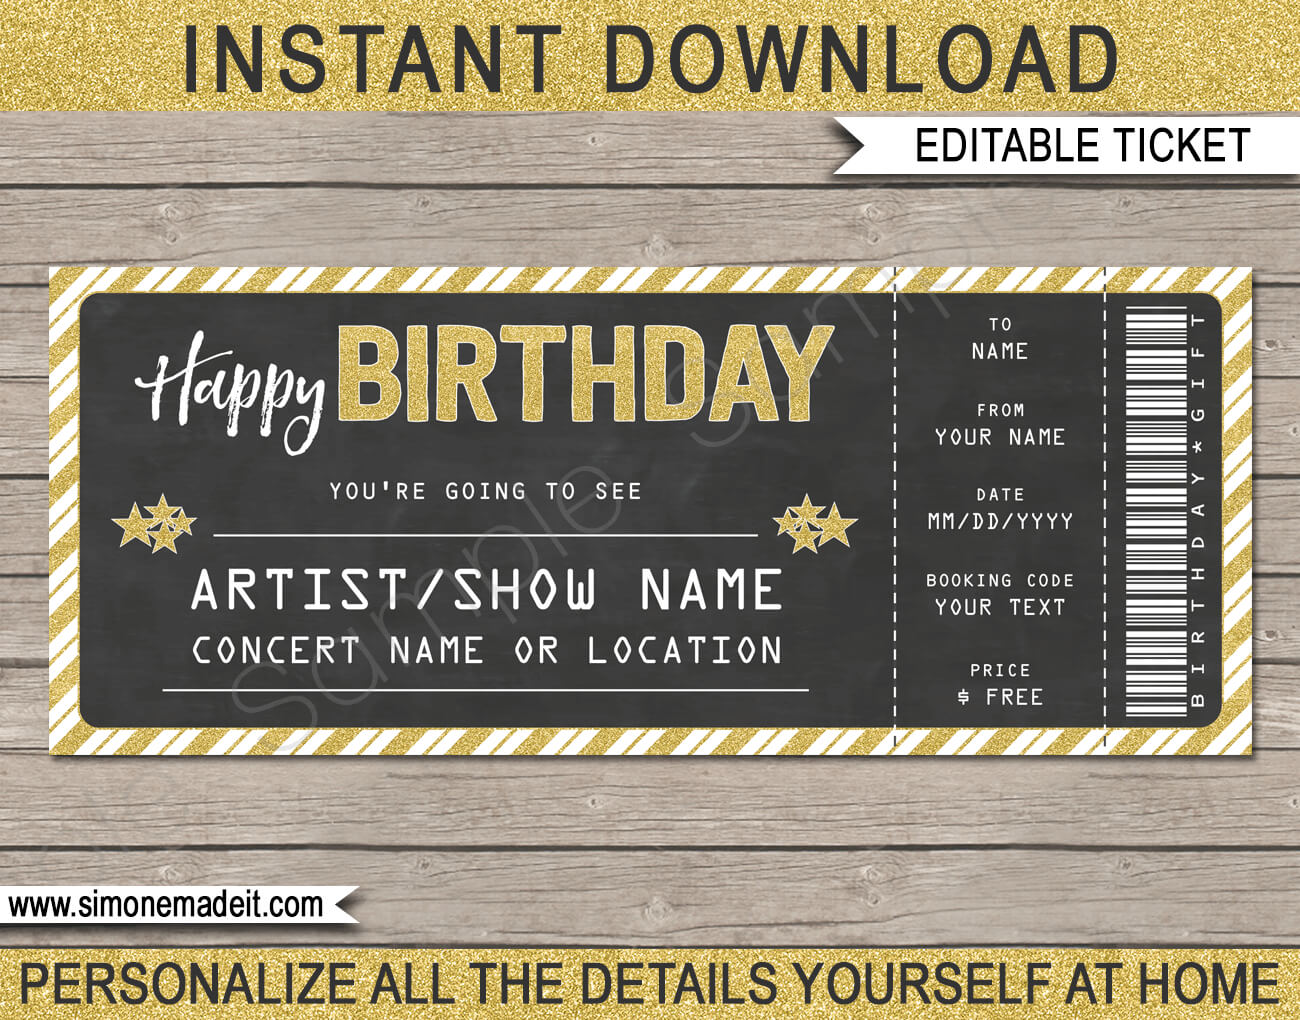 Printable Concert Ticket Template | Birthday Gift Voucher In Golf Gift Certificate Template